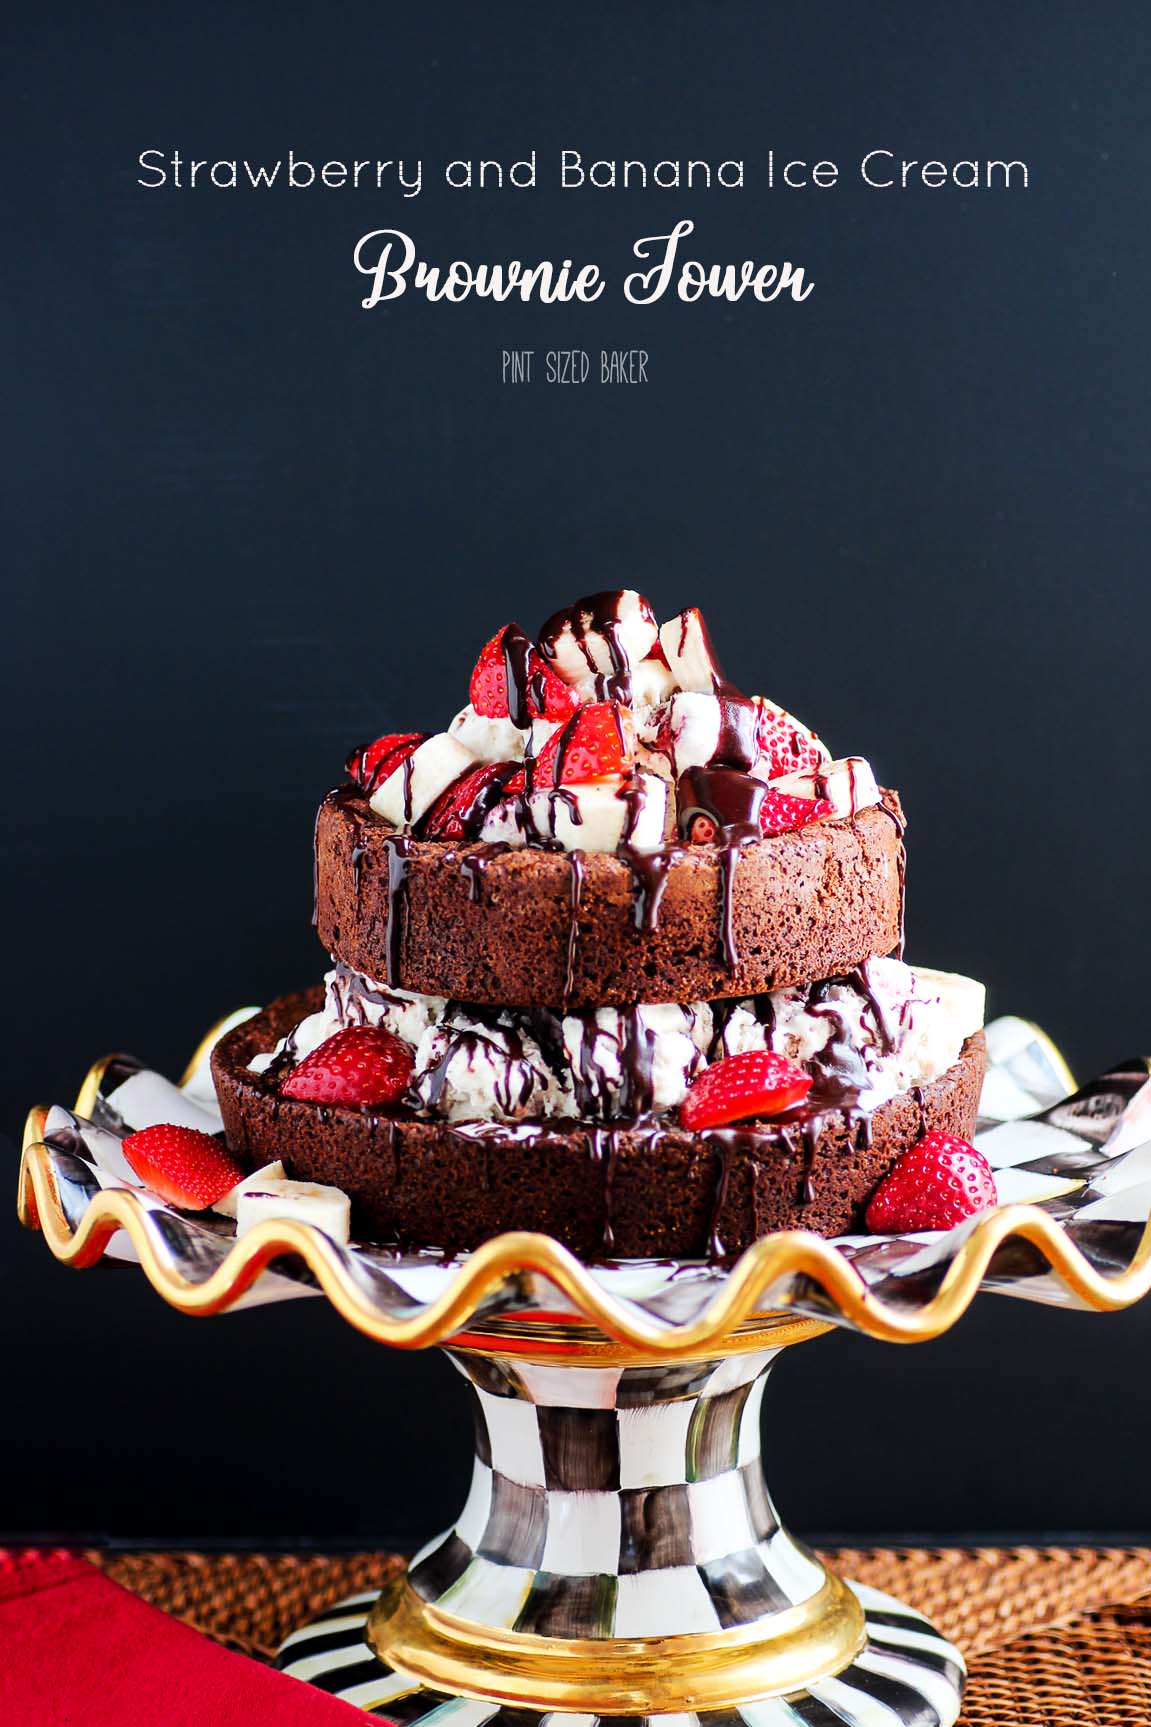 An awesome dessert made for some awesome friends. This Brownie and Ice Cream Tower dessert is simple to make, but impressive to serve!